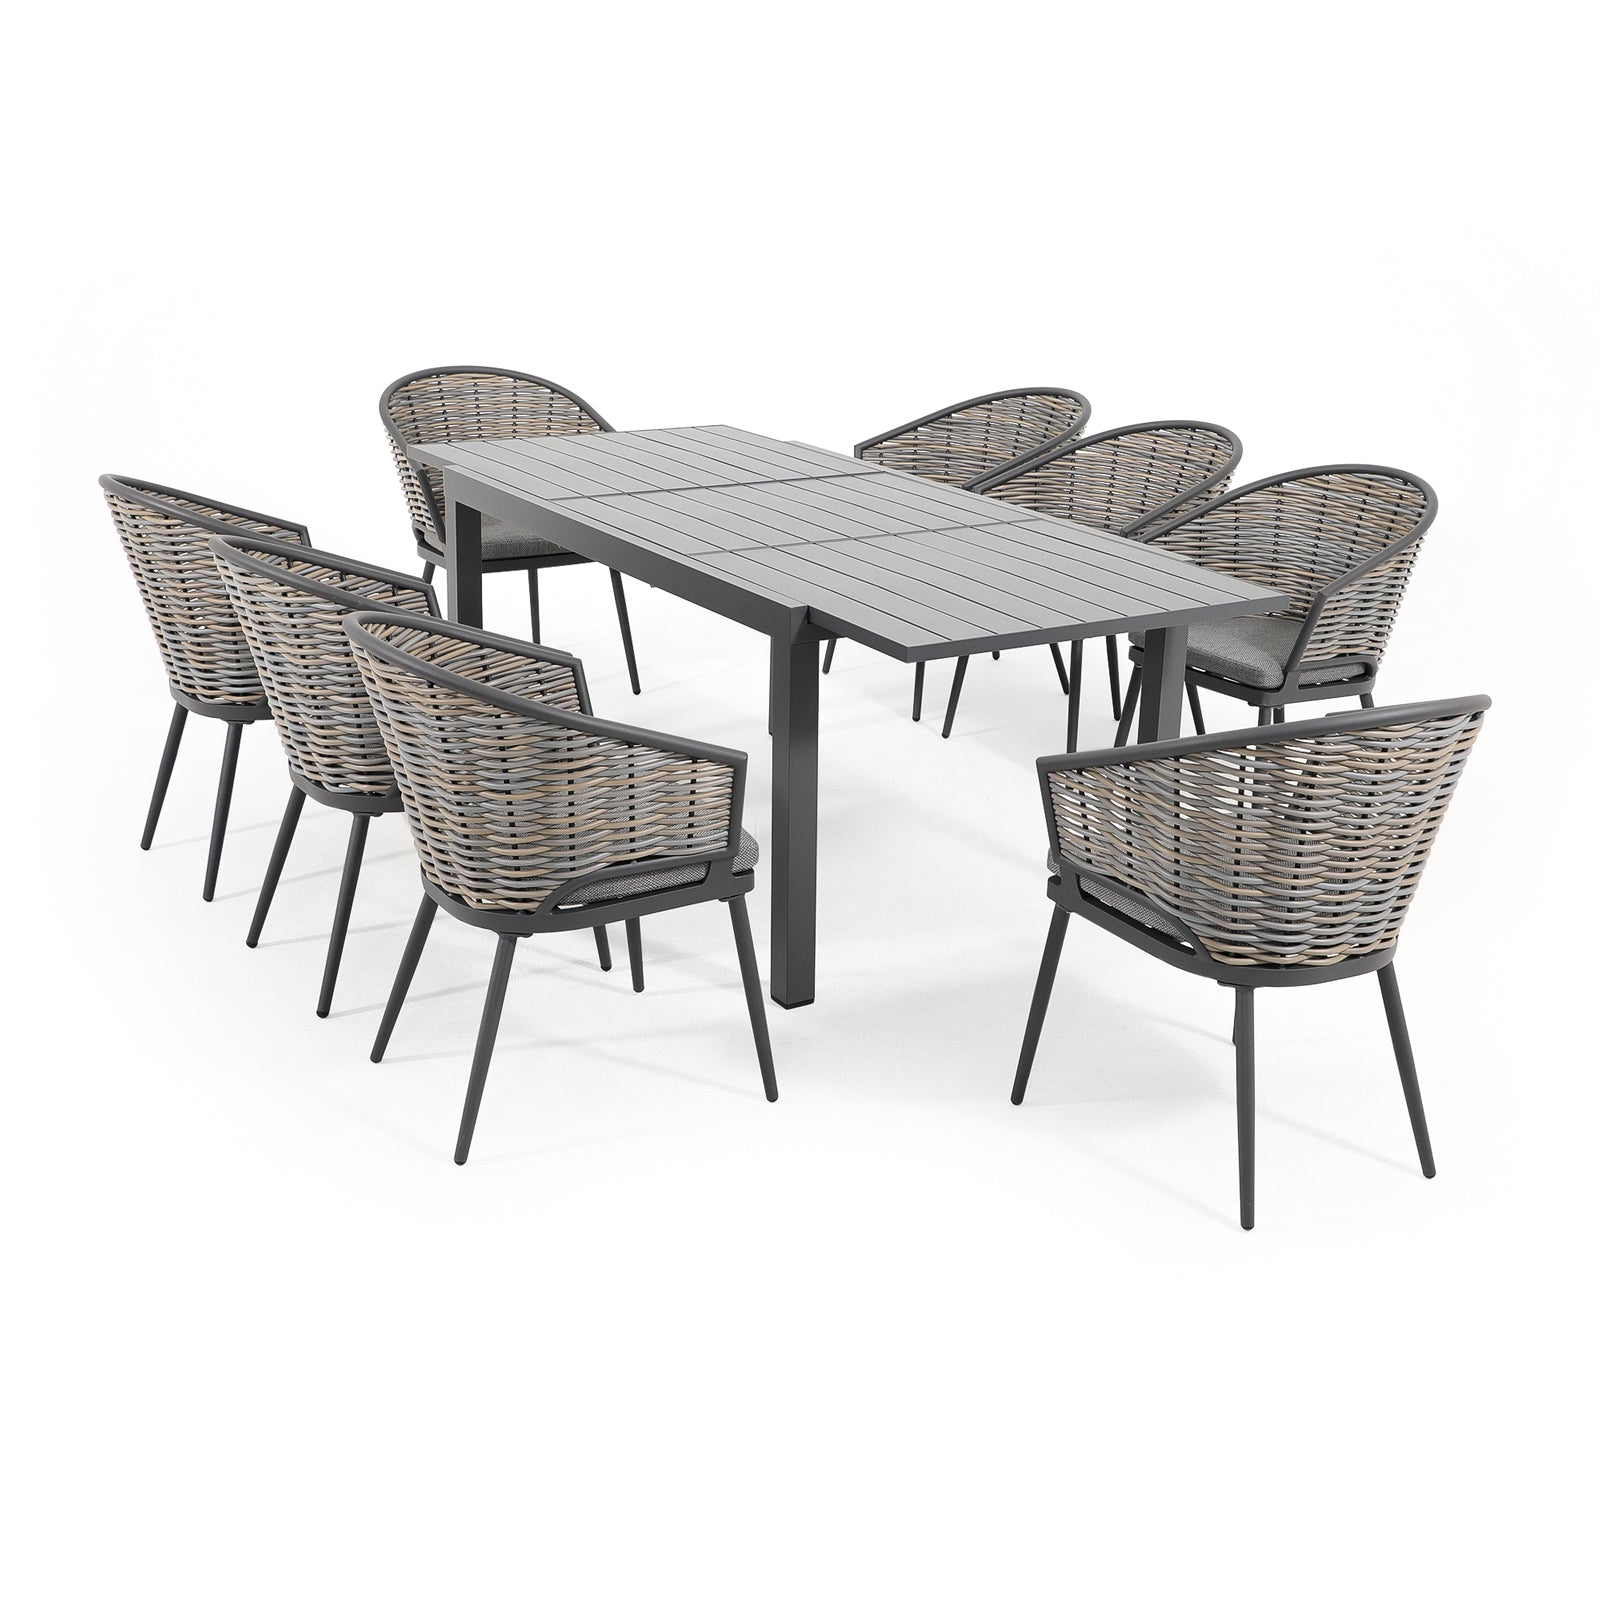 Burano Modern HDPE Wicker Outdoor Furniture, Grey wicker outdoor Dining Set with aluminum frame, 8 chairs with grey cushions, 1 aluminum extendable rectangle dining Table, white background - Jardina Furniture#Piece_9-pc.